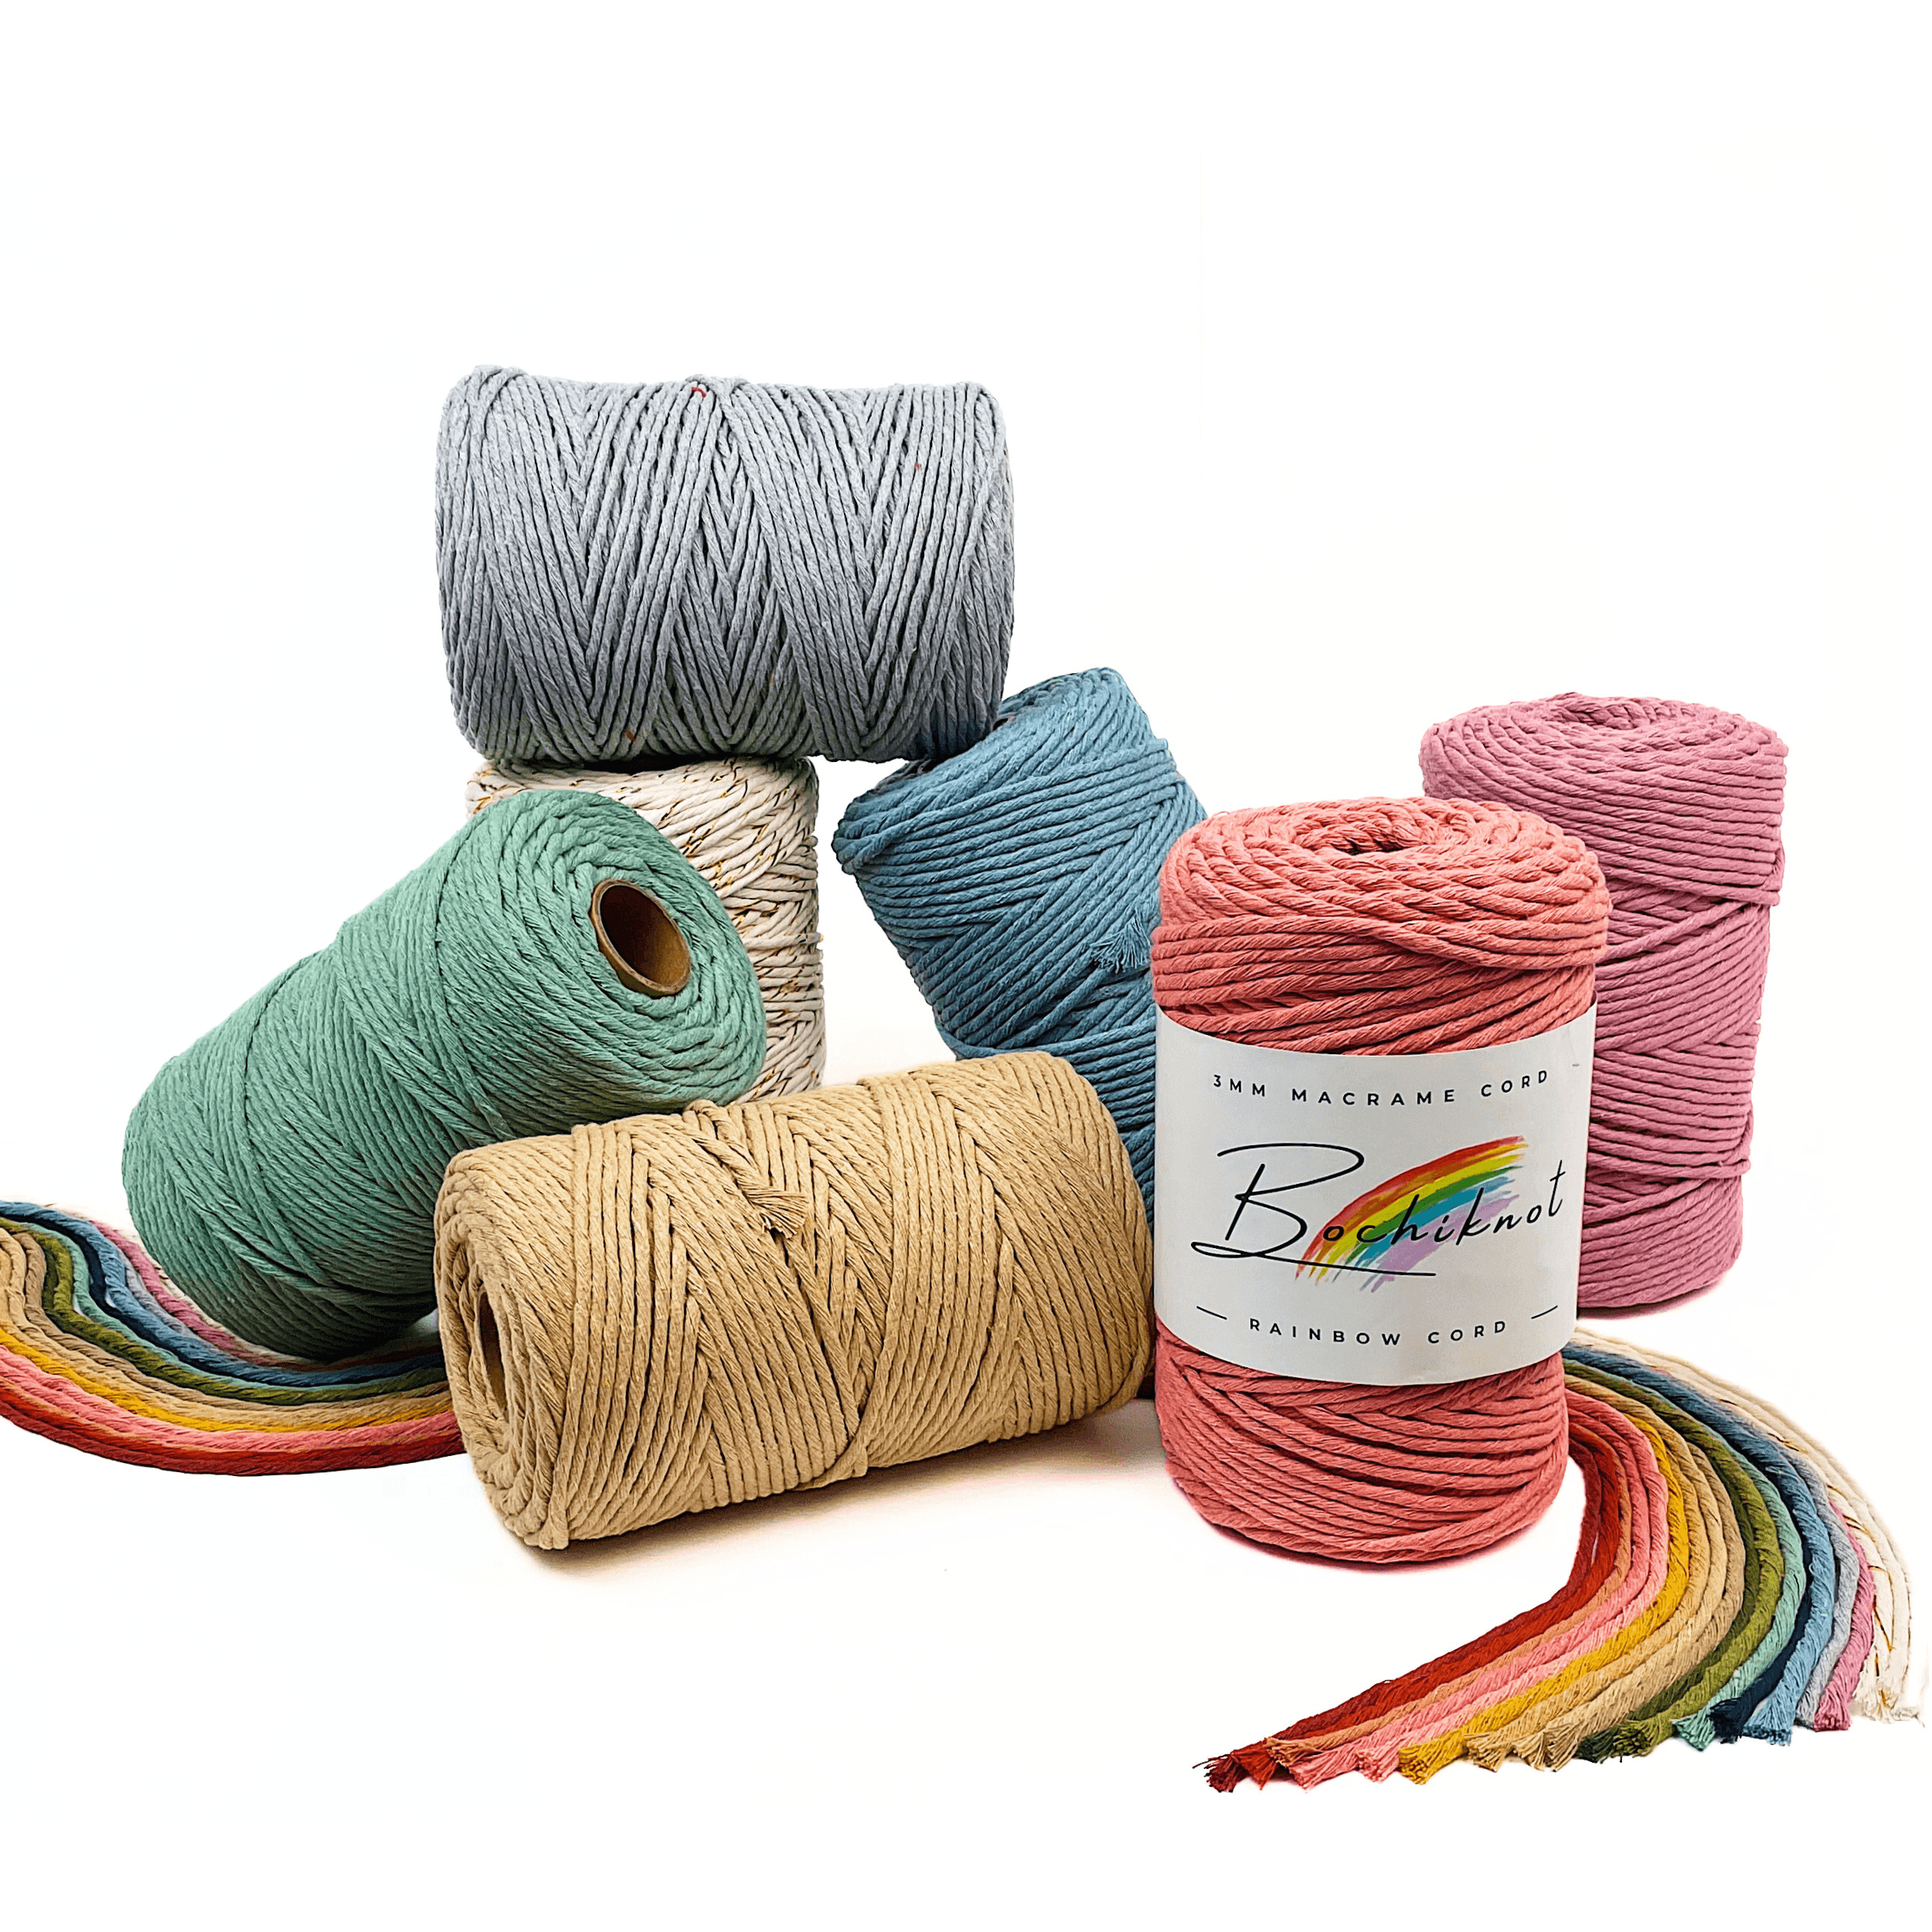 BOCHIKNOT 9mm Thick Macrame Cord - Macrame Supplies Cotton Rope - Macrame  Cotton Cord for Crafts - Macrame Rope Colored Cord - Thick Rope for Crafts  